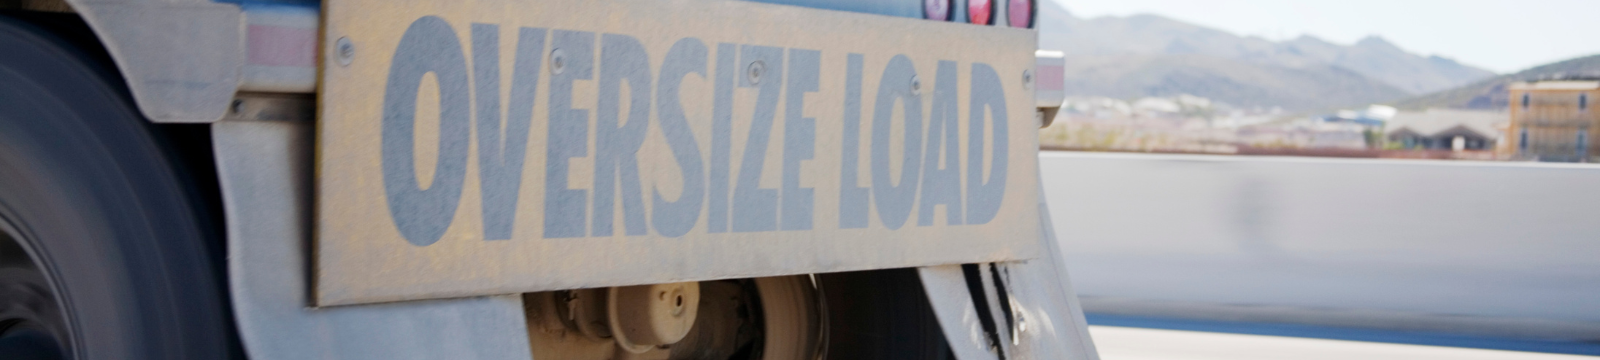 Oversized load sign